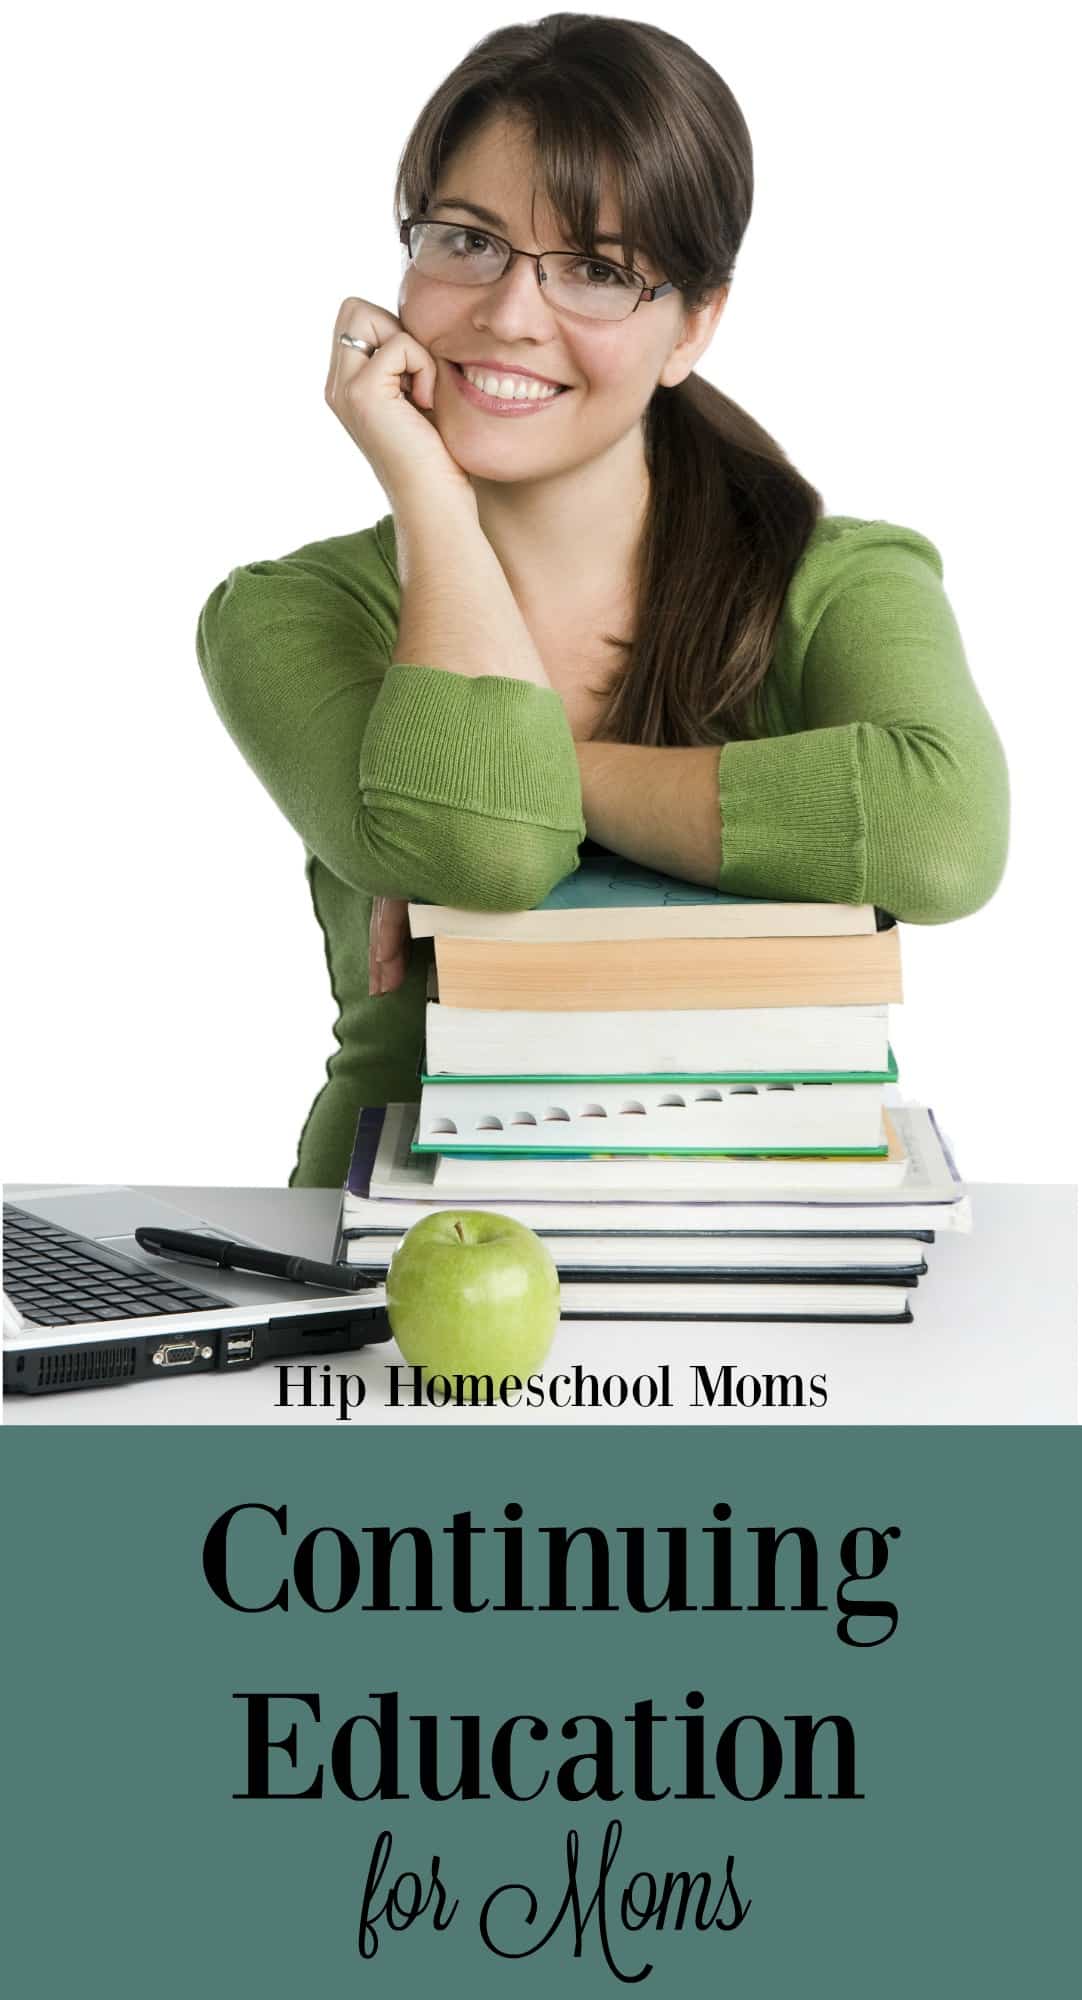 Continuing Education for Moms